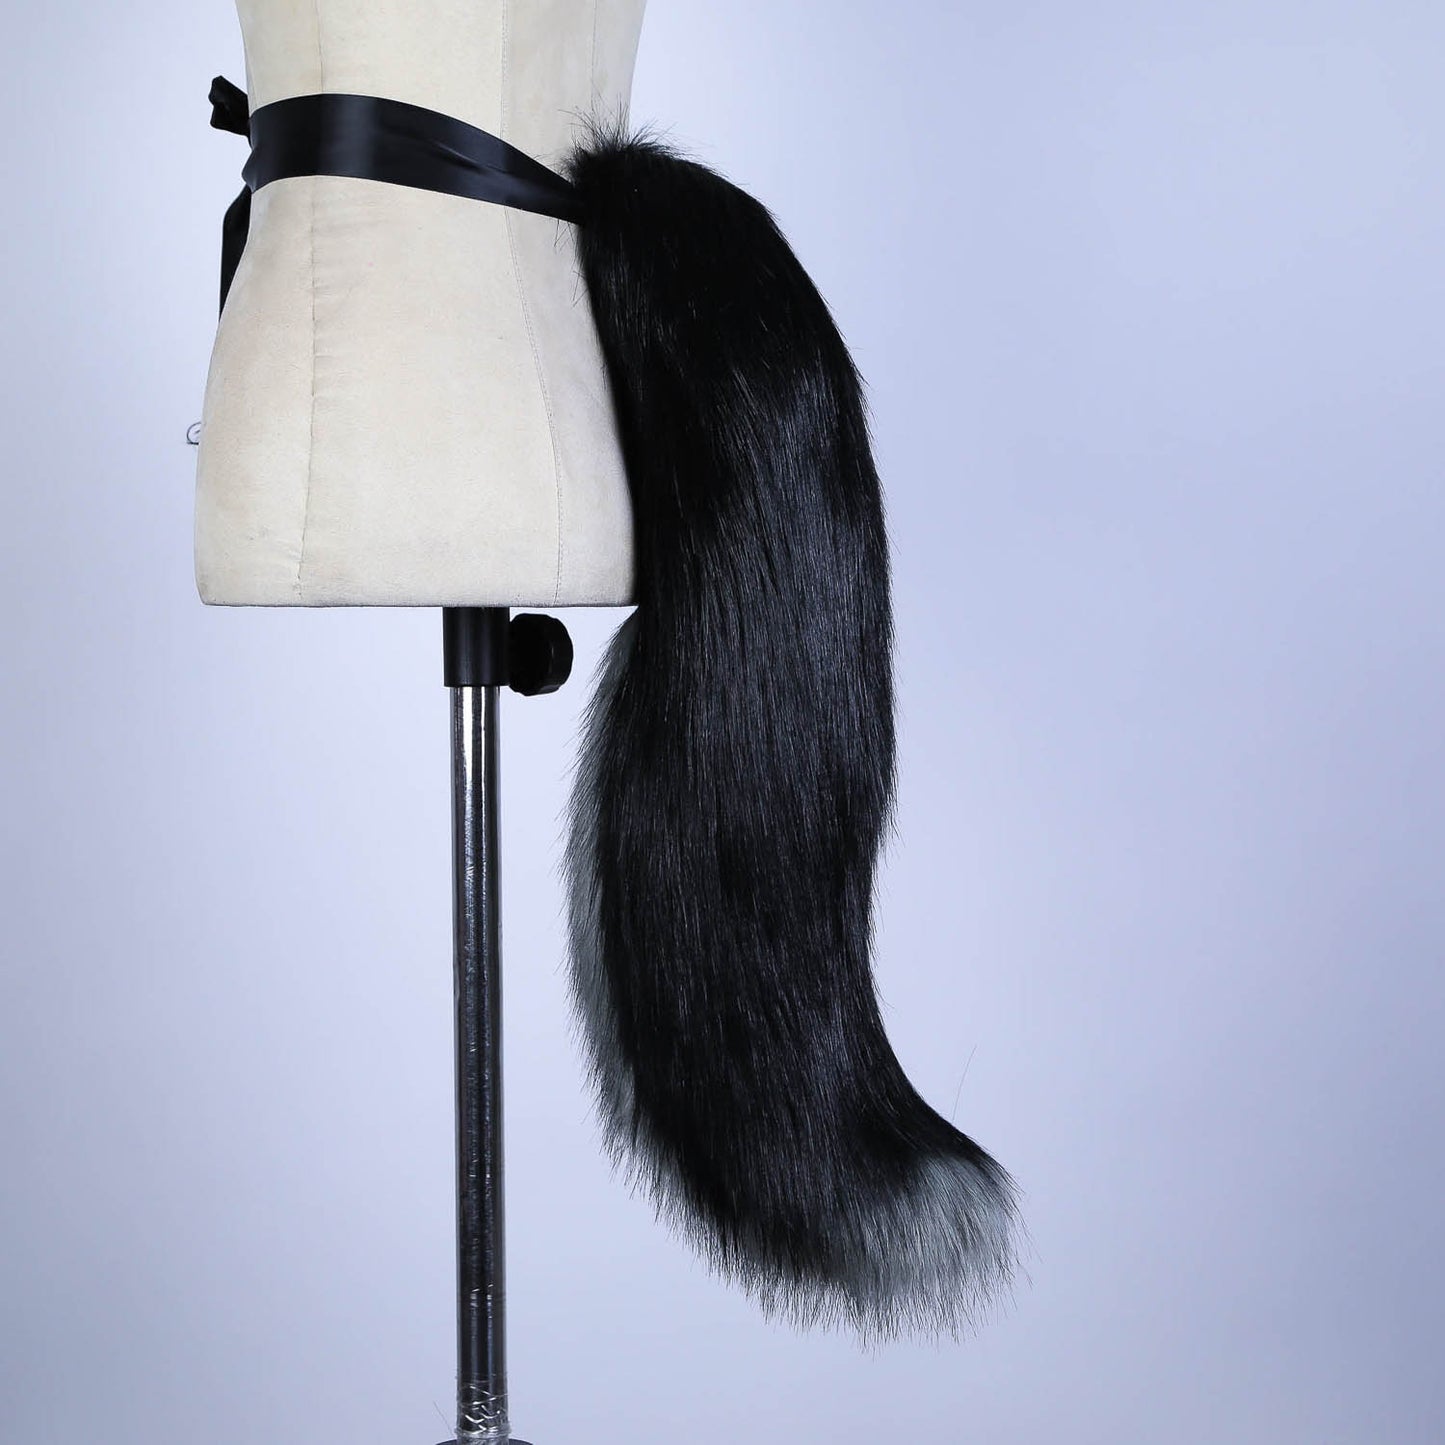 Wriothesley Ears and Tail Set (Genshin Impact)